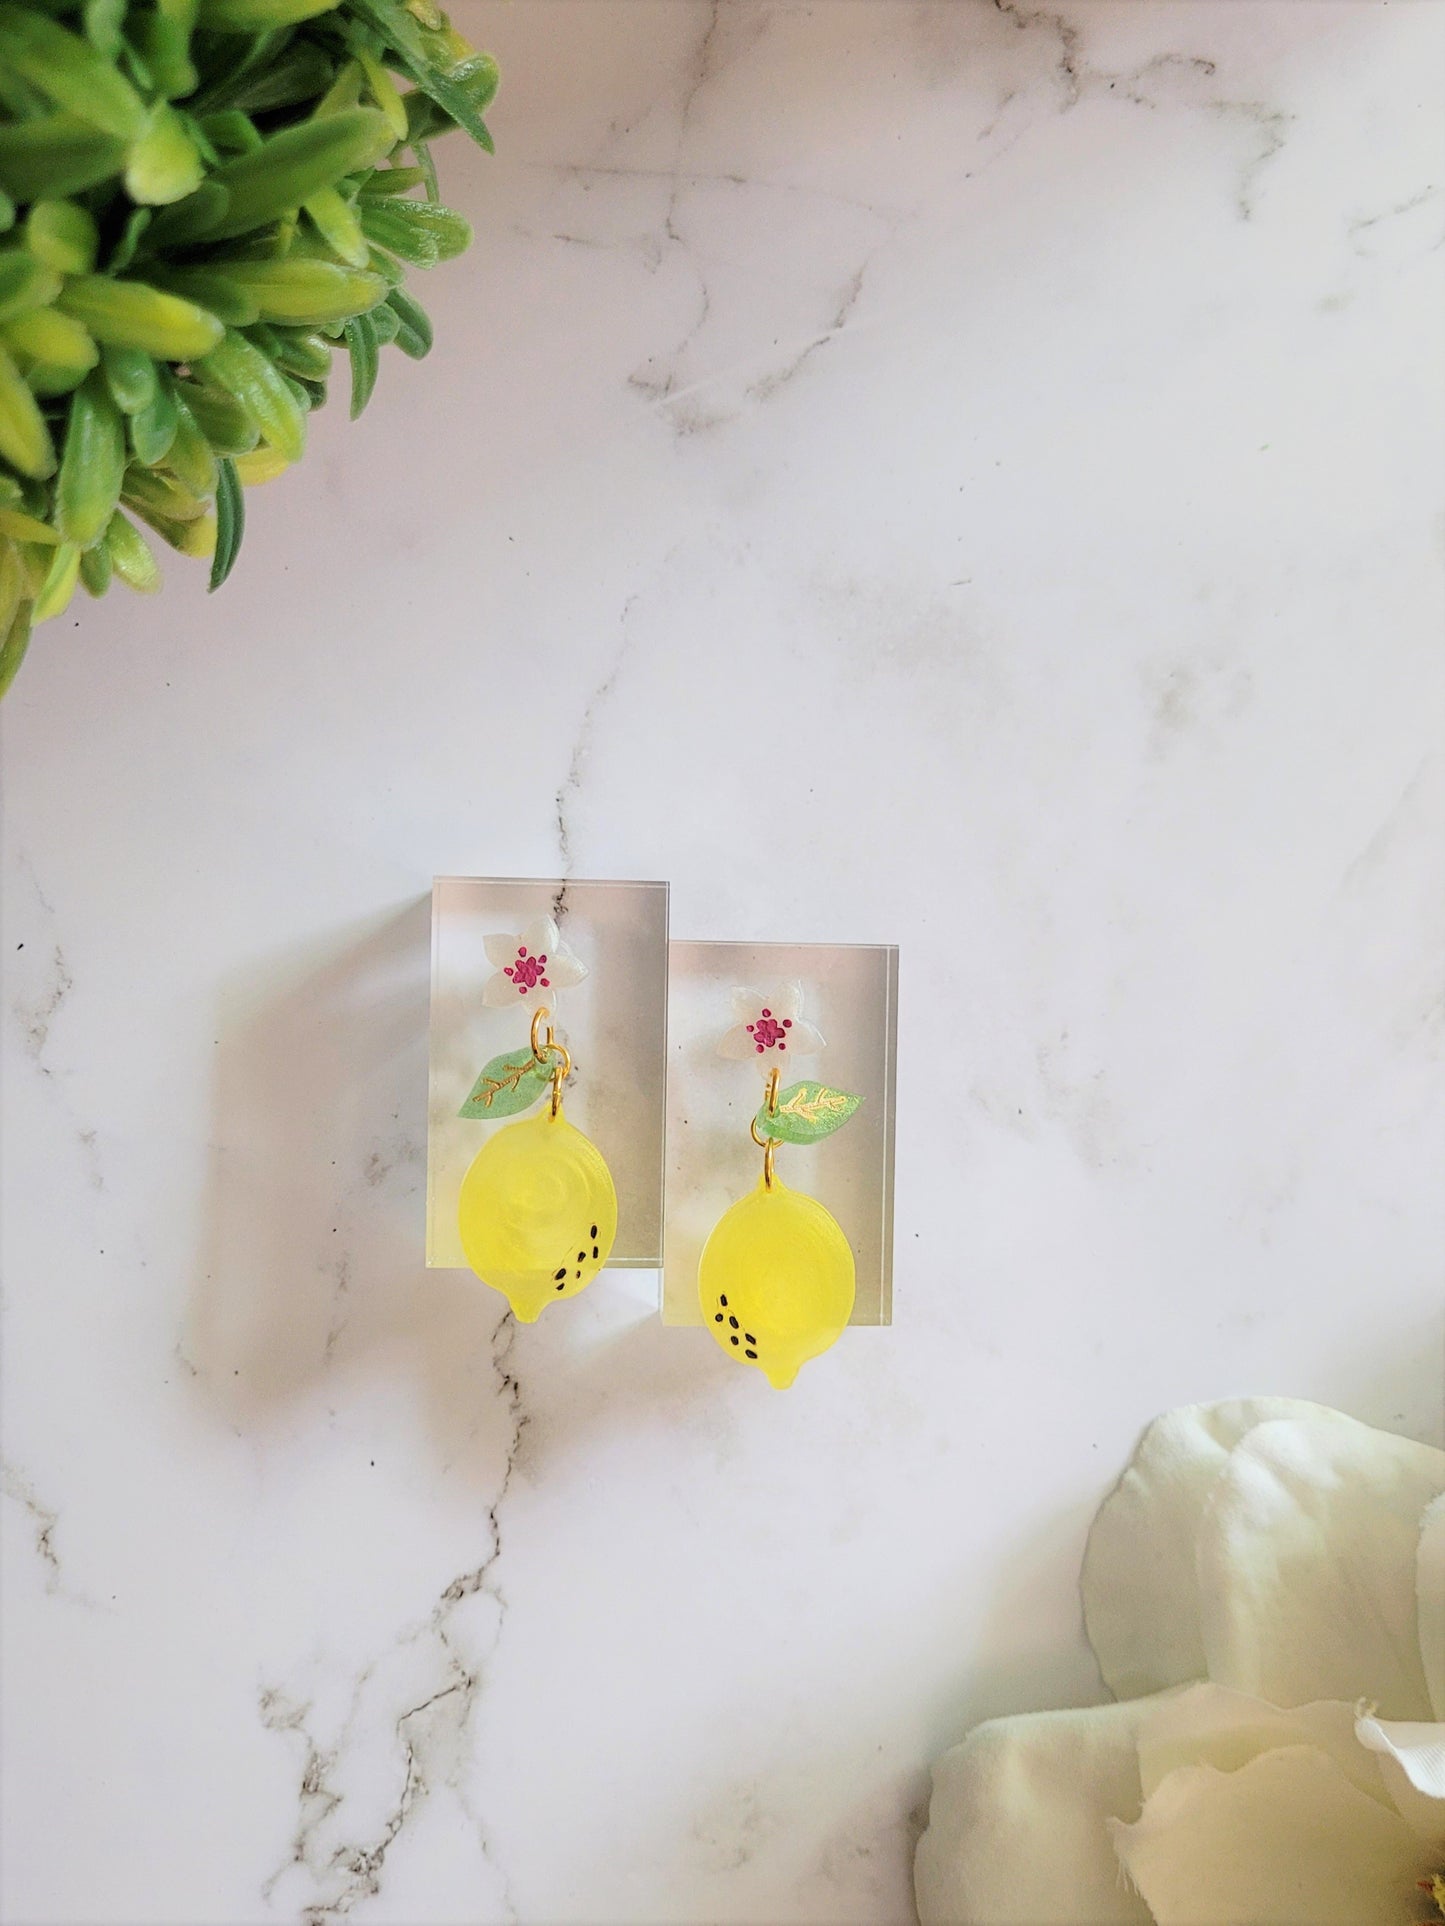 Resin earrings of lemon blossom, with fruit and leaf dangling below.